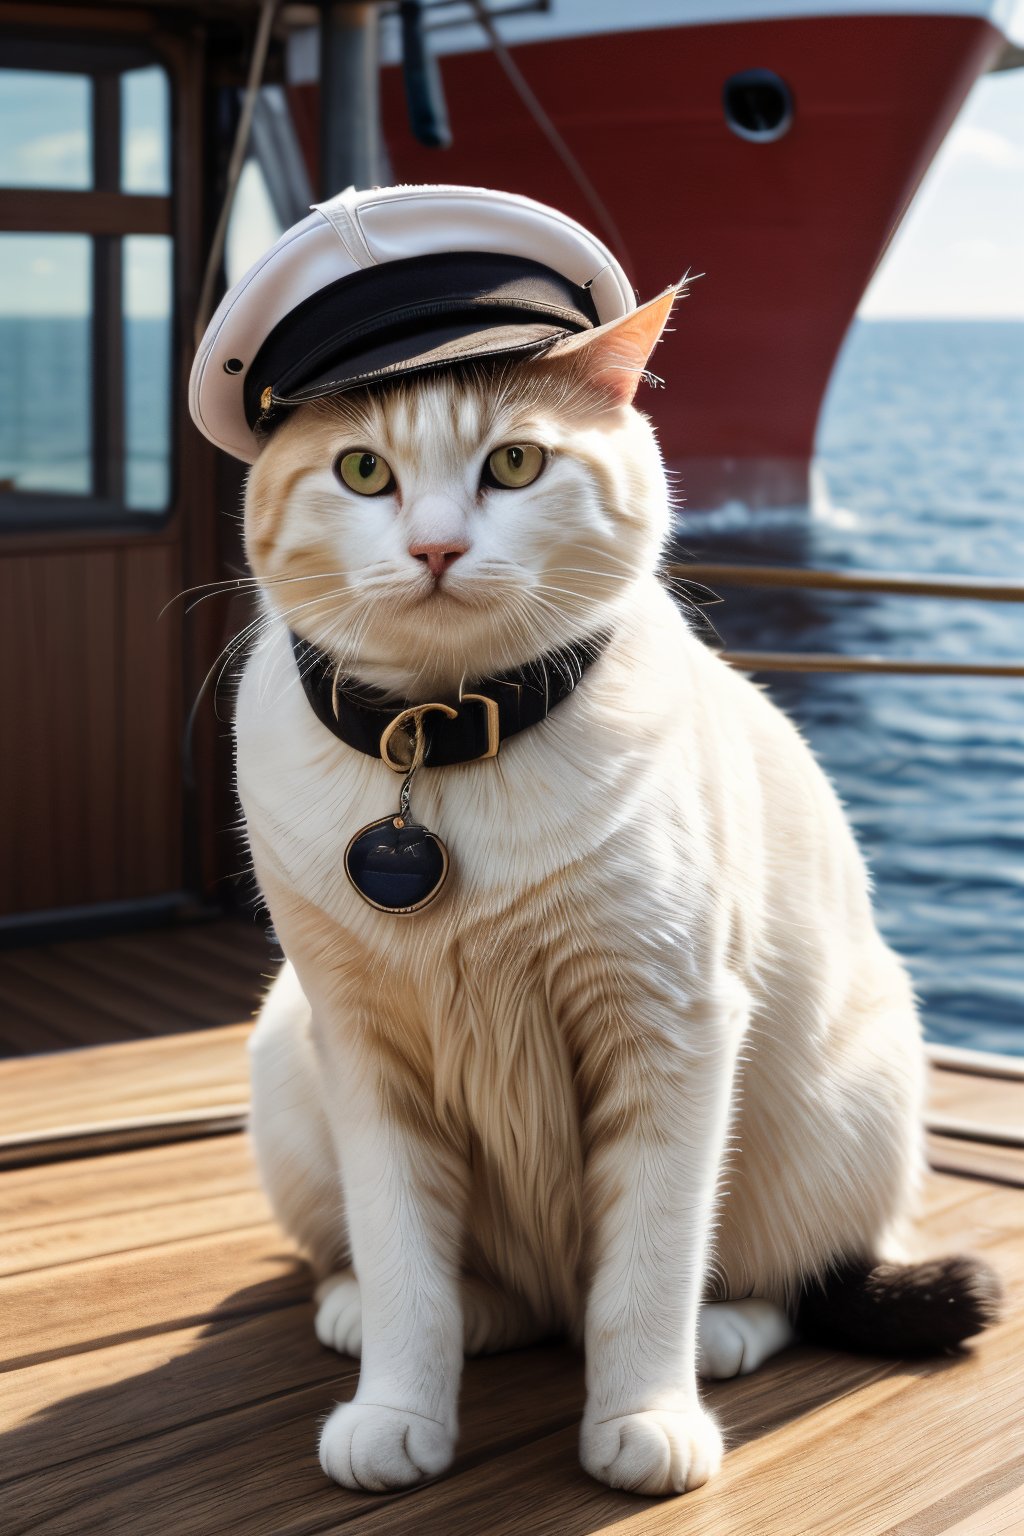 📷 A charming image of a cute white cat dressed as a sailor on a ship. The cat, rendered in hyper-realistic detail, is seen wearing a sailor's hat and collar, its fur immaculately white against the backdrop of the ship. The style is hyper-realistic, with a high level of detail and precision. The lighting is soft and diffused, casting a gentle glow on the cat and the ship's deck. The color palette is natural, with a focus on the white of the cat's fur and the weathered wood of the ship. The composition is carefully balanced, with the sailor cat centrally positioned in the frame. The image is to be generated with a high-resolution 16k, using a virtual 85mm lens, with a focus on sharpness and depth-of-field. --ar 16:9 --v 5.1 --style raw 